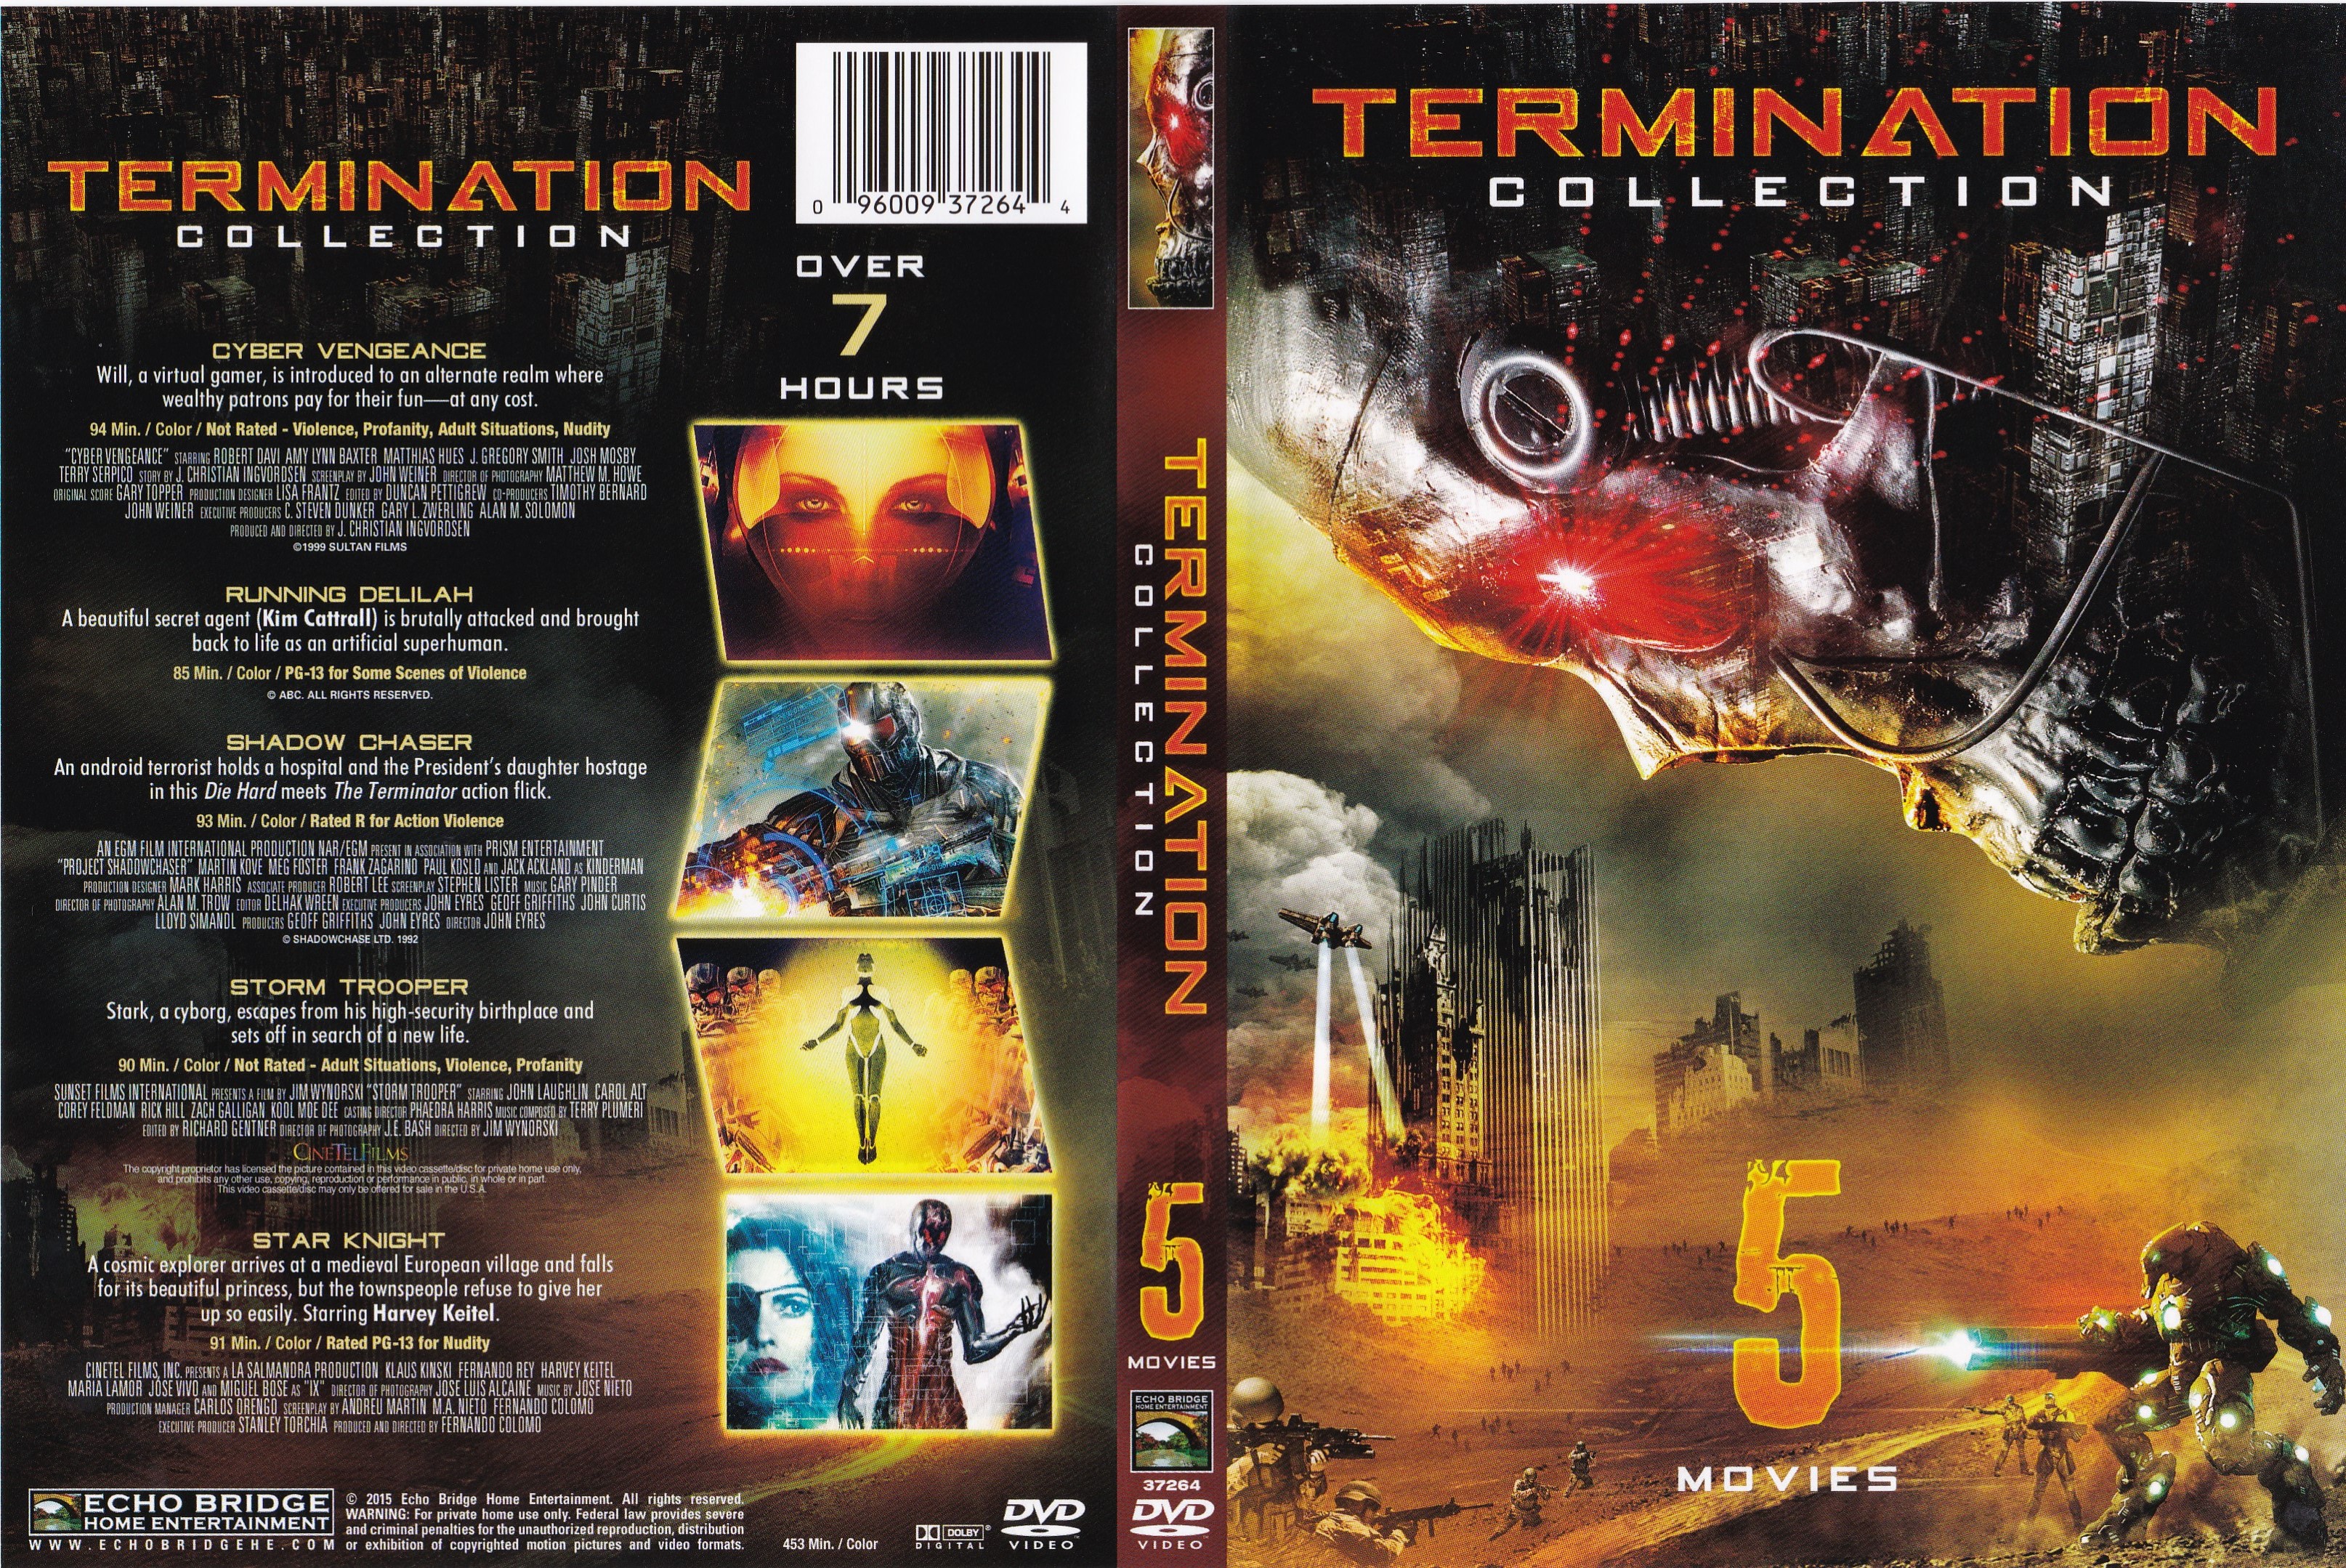 Jaquette DVD Termination Collection Zone 1 COFRRET